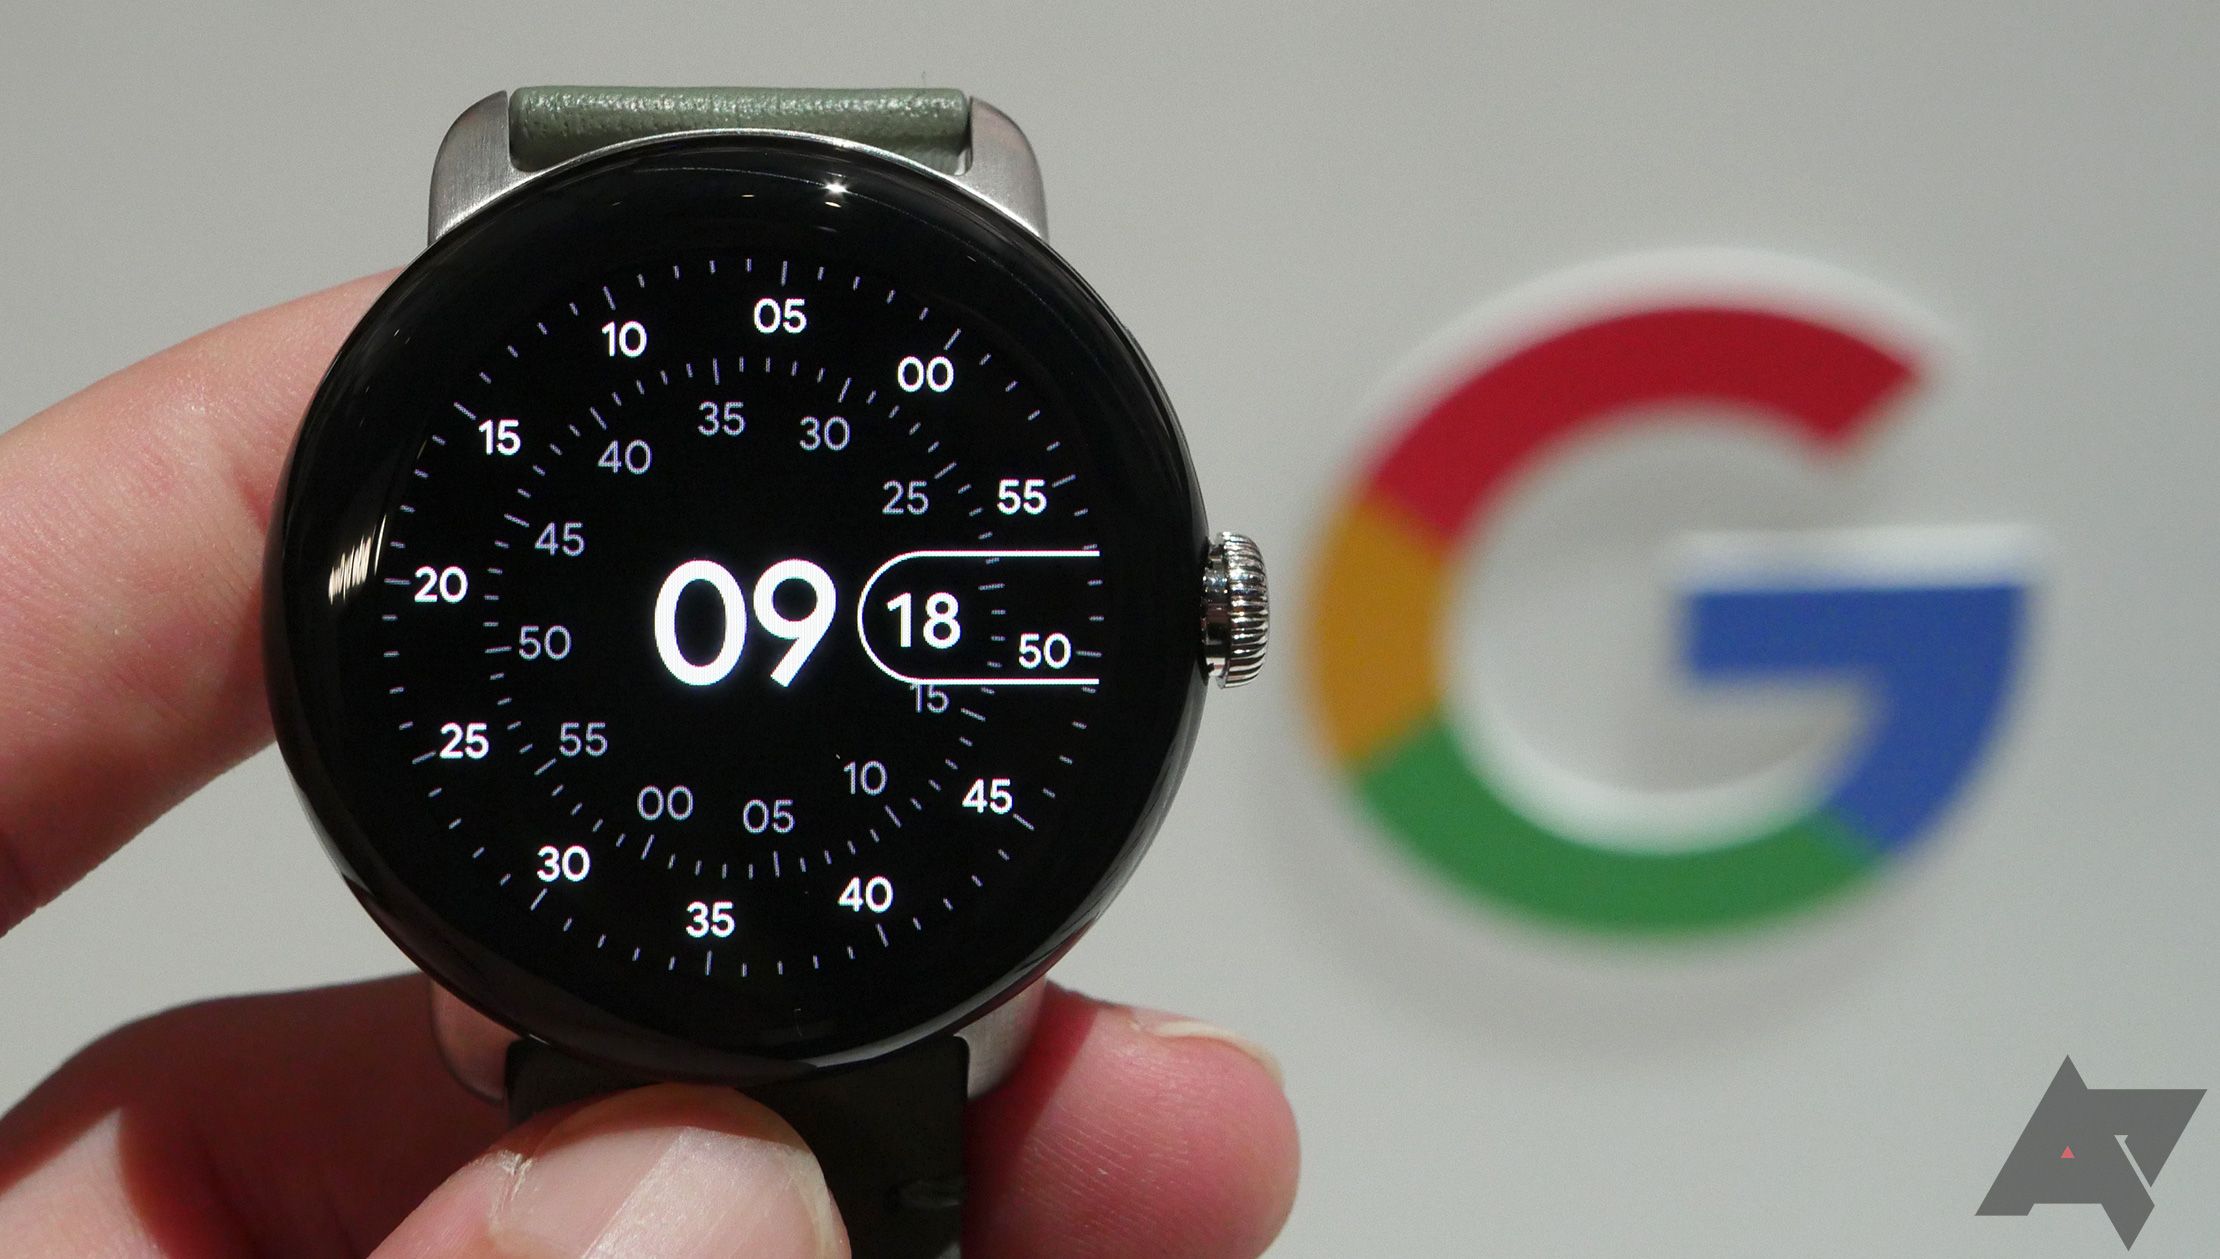 How to use Google Maps on your Android smartwatch